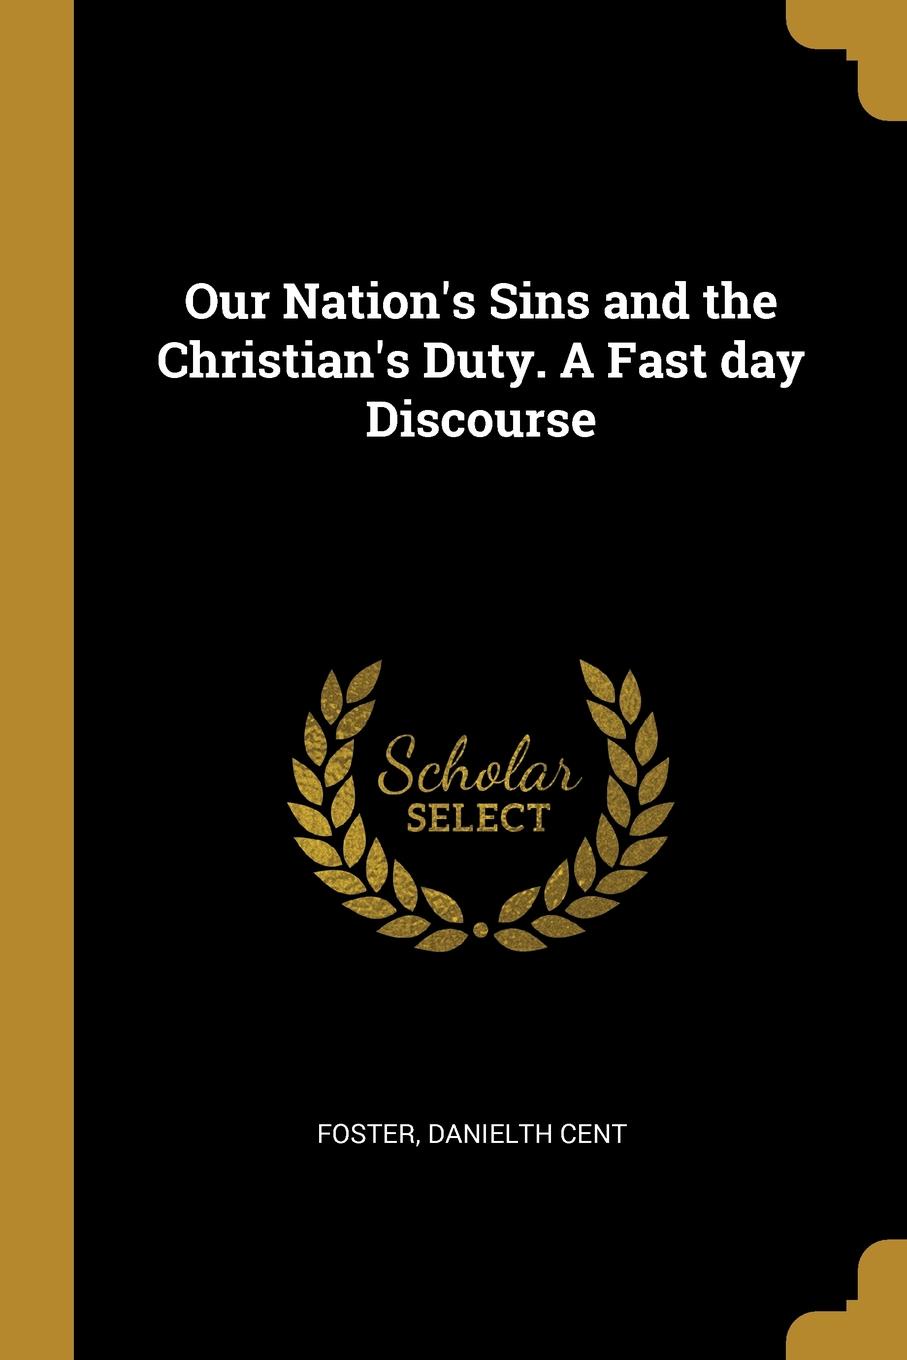 Our Nation.s Sins and the Christian.s Duty. A Fast day Discourse